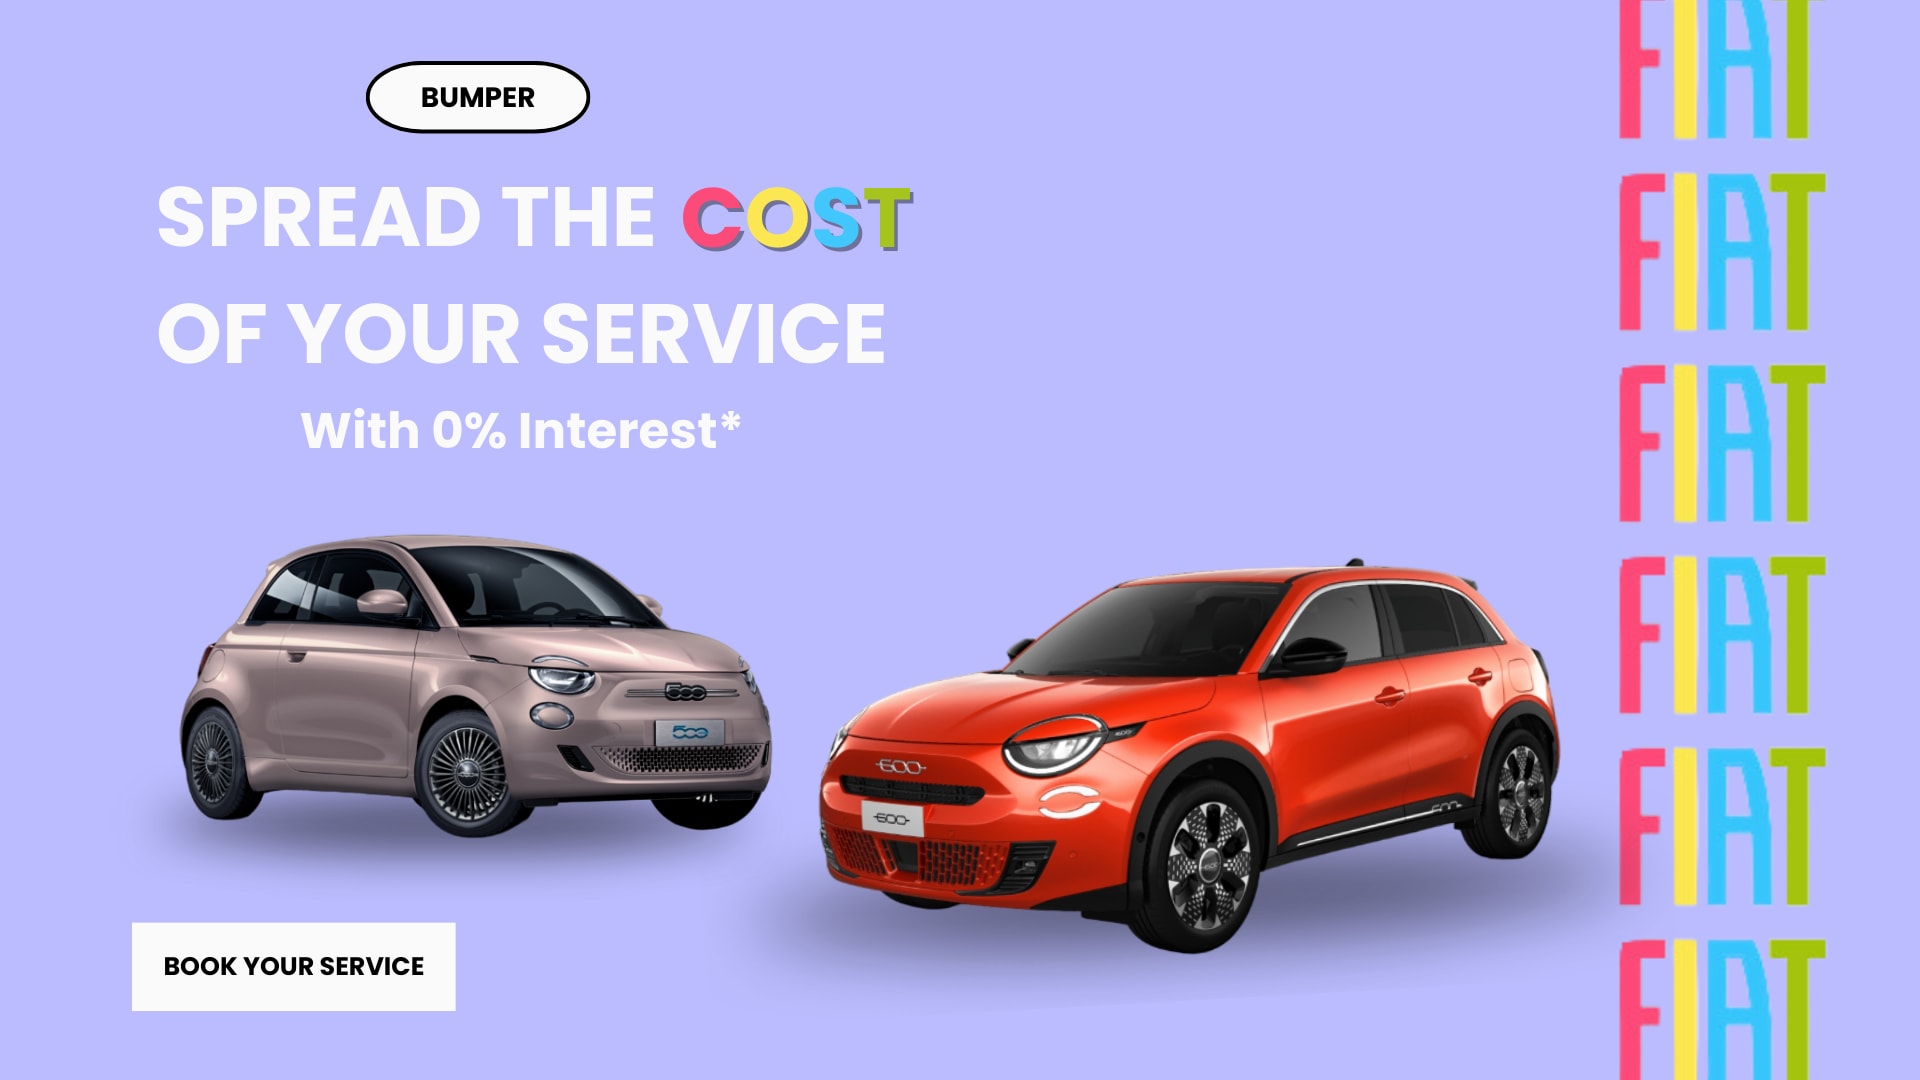 Fiat Bumper Spread the cost of your service with 0% interest